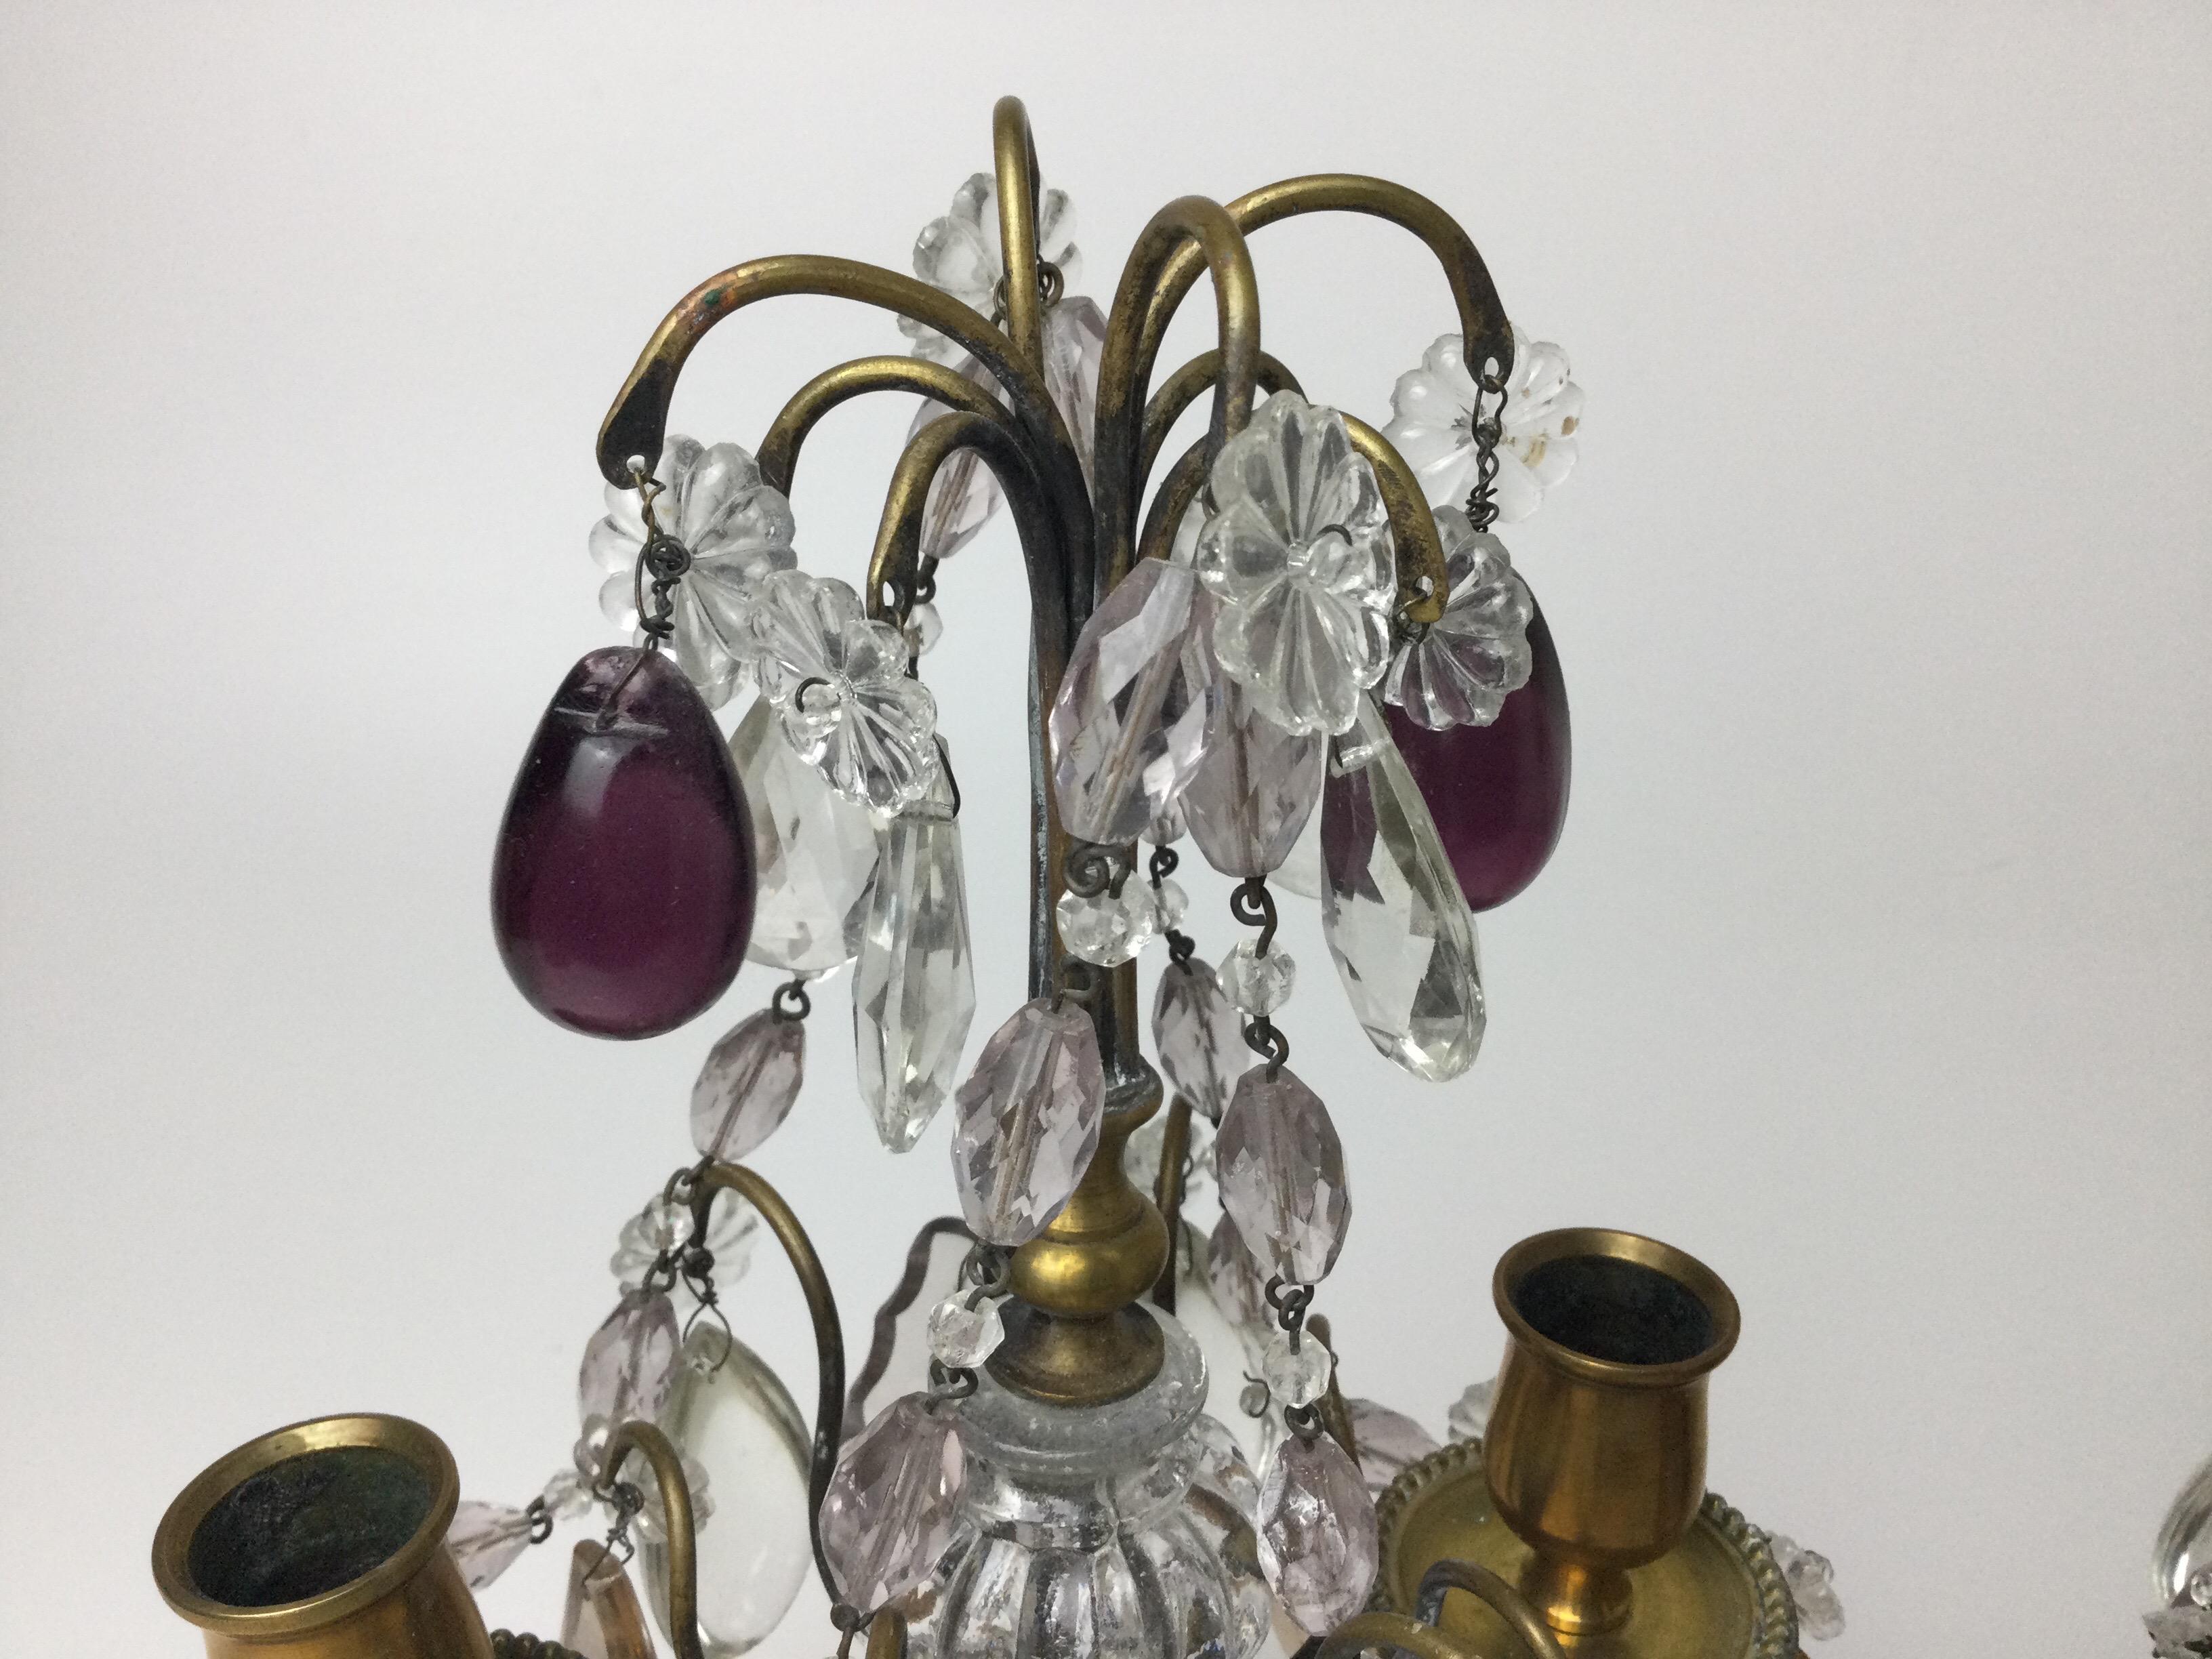 Pair of Girandoles Candelabras with Clear Amethyst and Amber Crystals In Good Condition For Sale In Lambertville, NJ